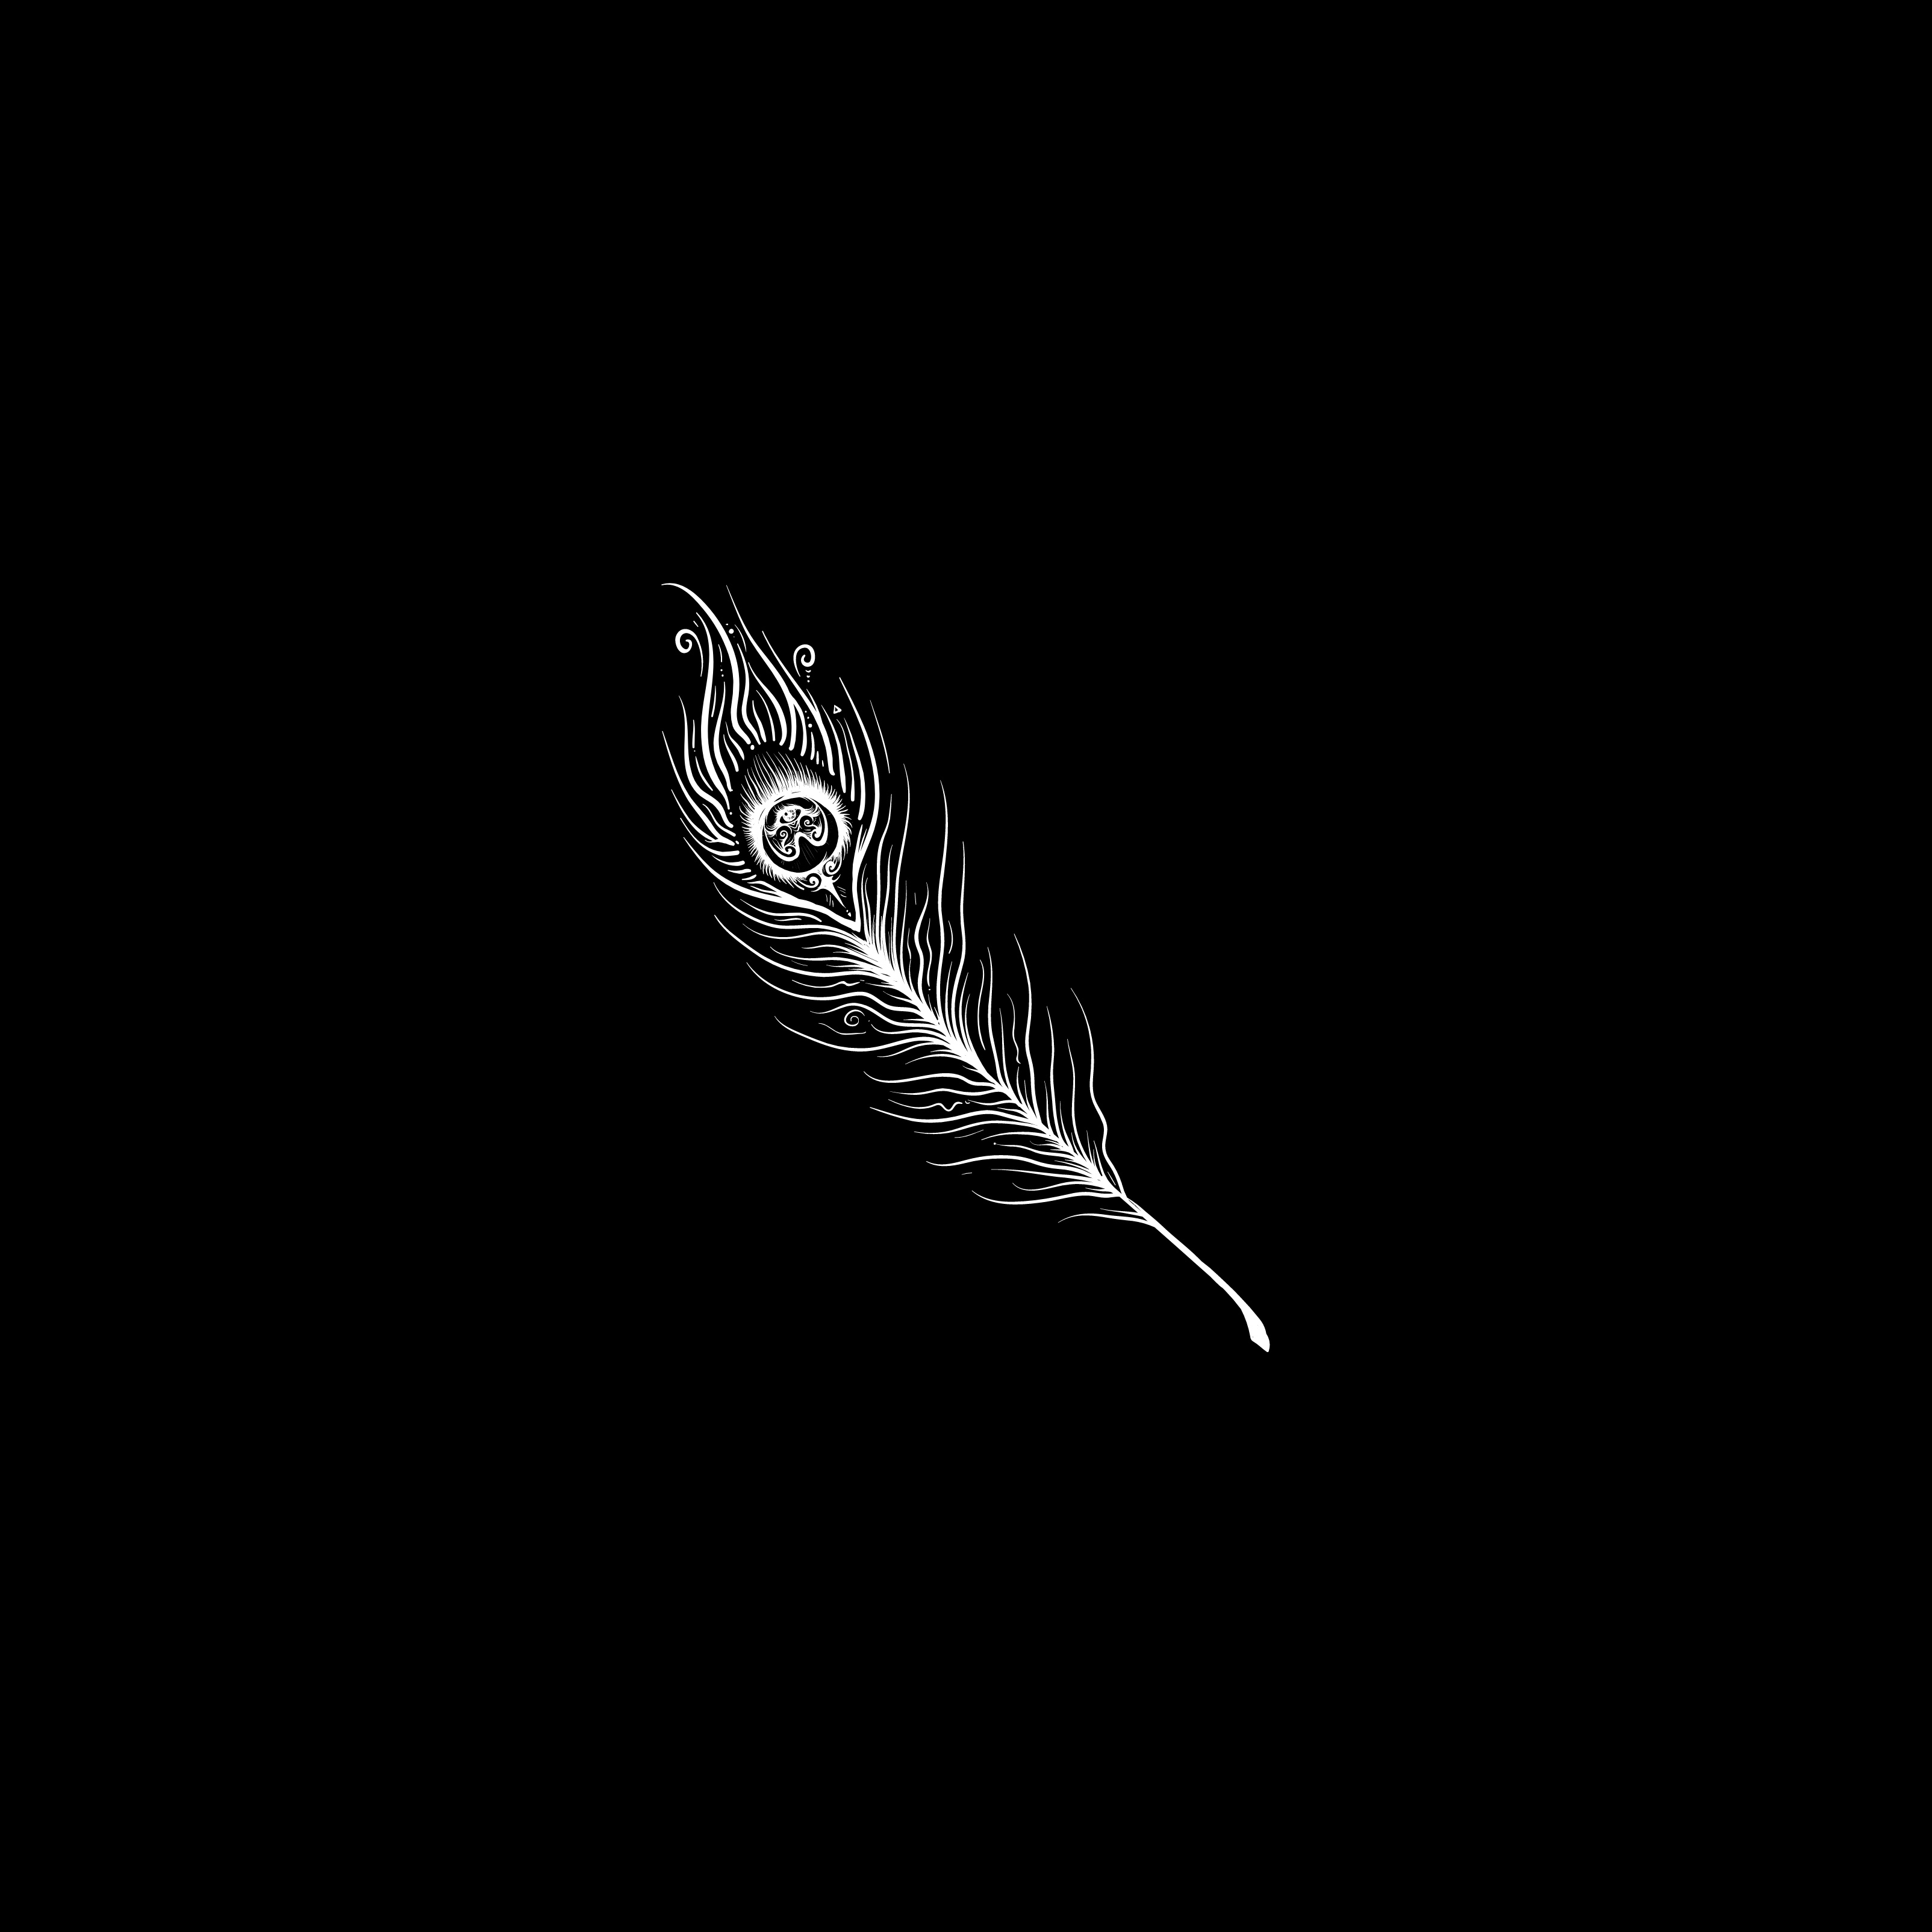 iPad Wallpapers Peacock Feather White Black Background iPad Wallpaper 3208x3208 px